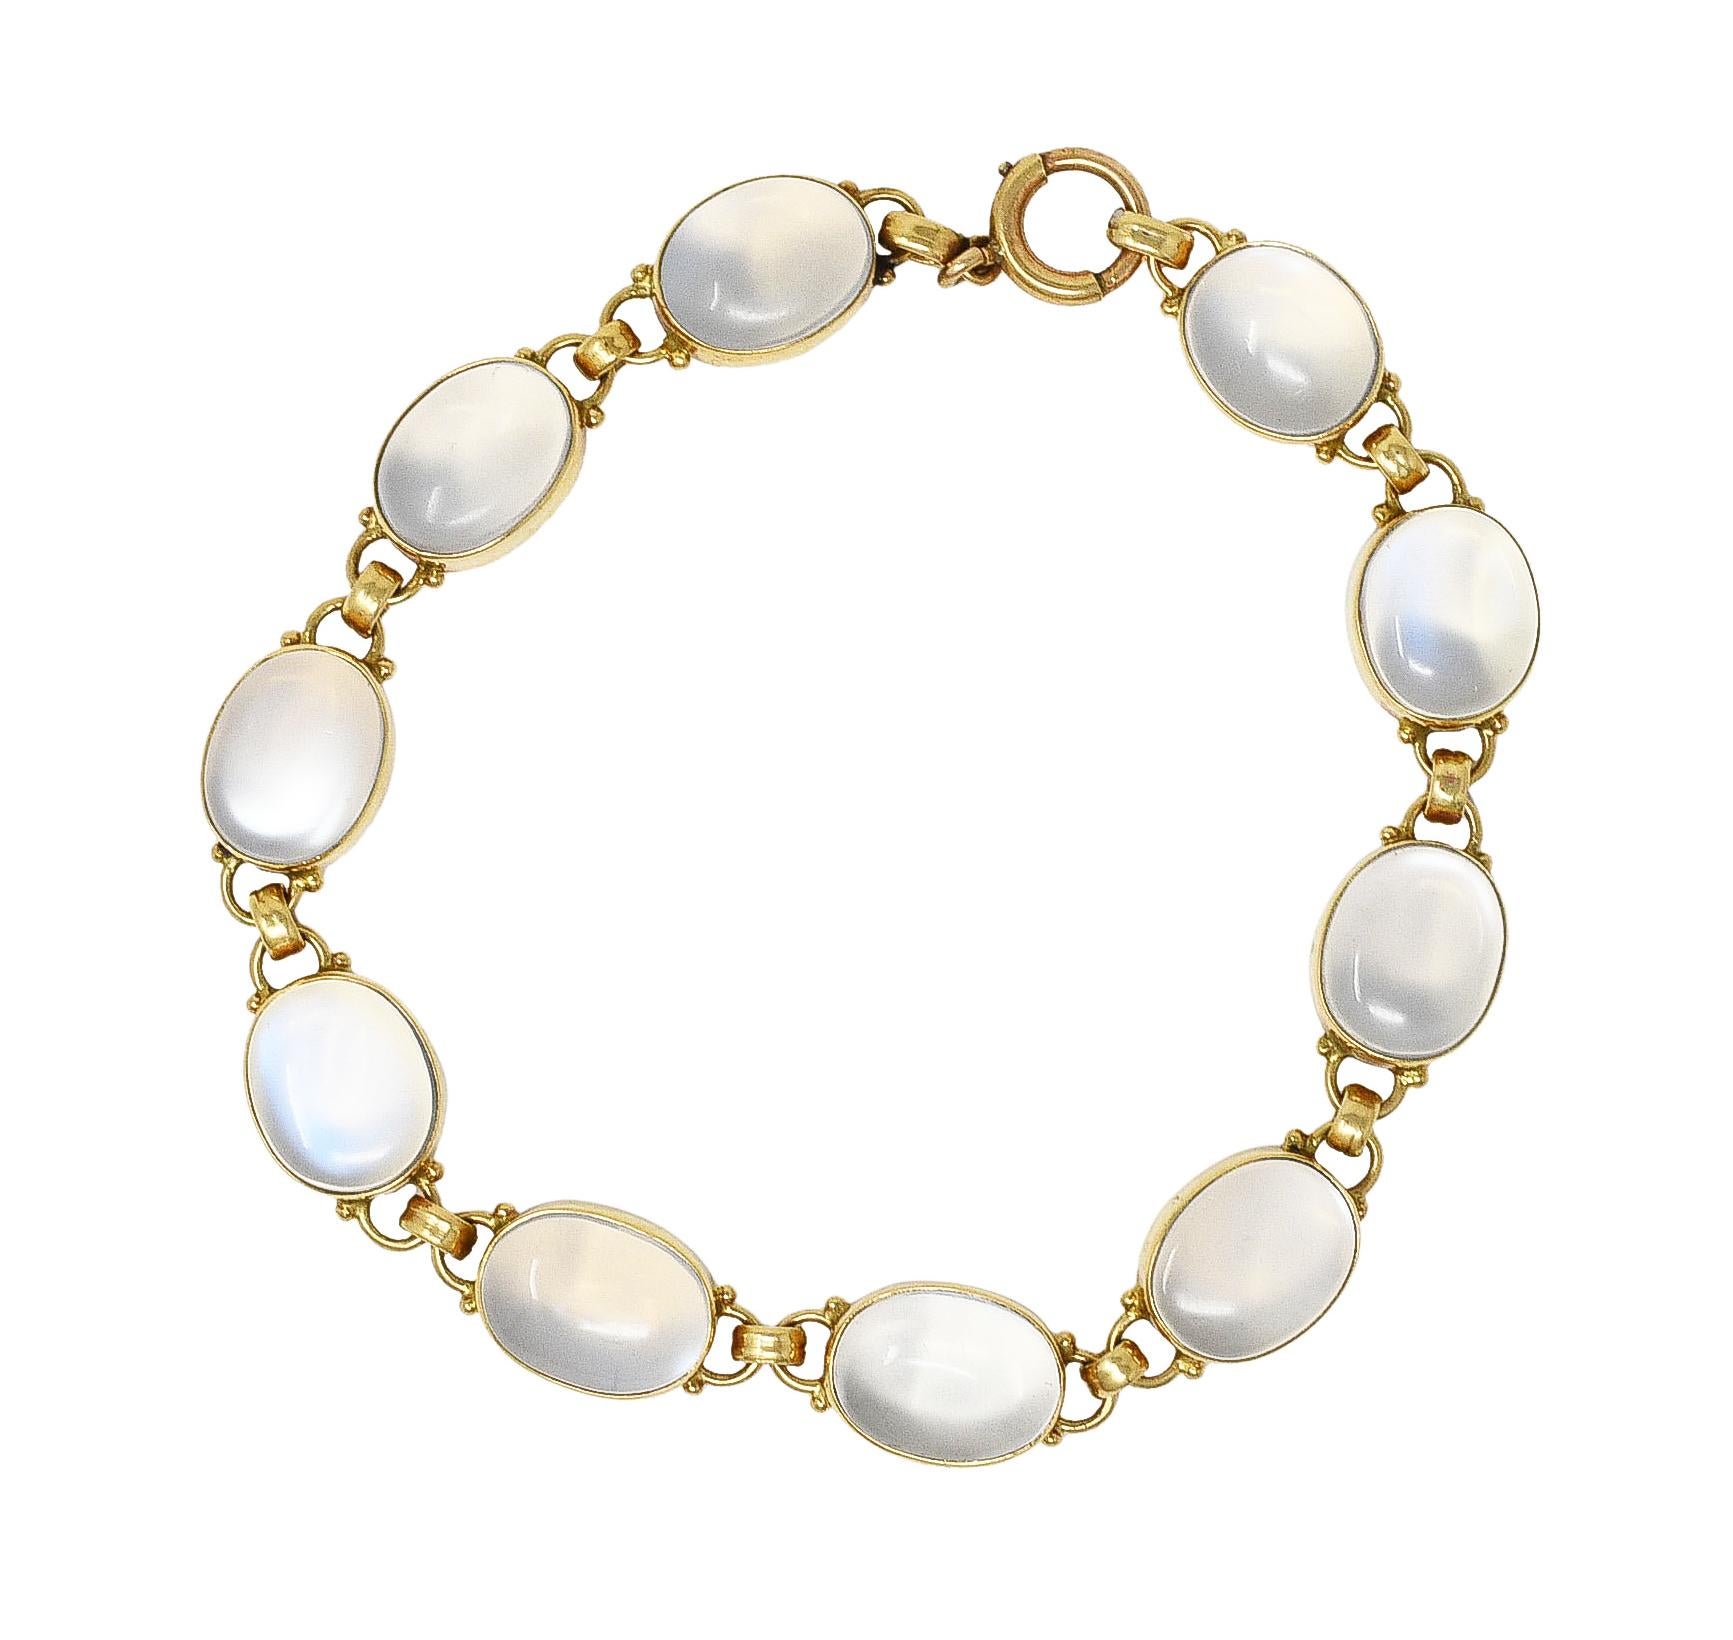 Designed as a link bracelet featuring ten oval shaped moonstone cabochons. Translucent colorless body with blue and white adularescence. Measuring 8.0 x 10.0 mm - set in bezel links with gold beading. Connected by grooved oval links. Completed by